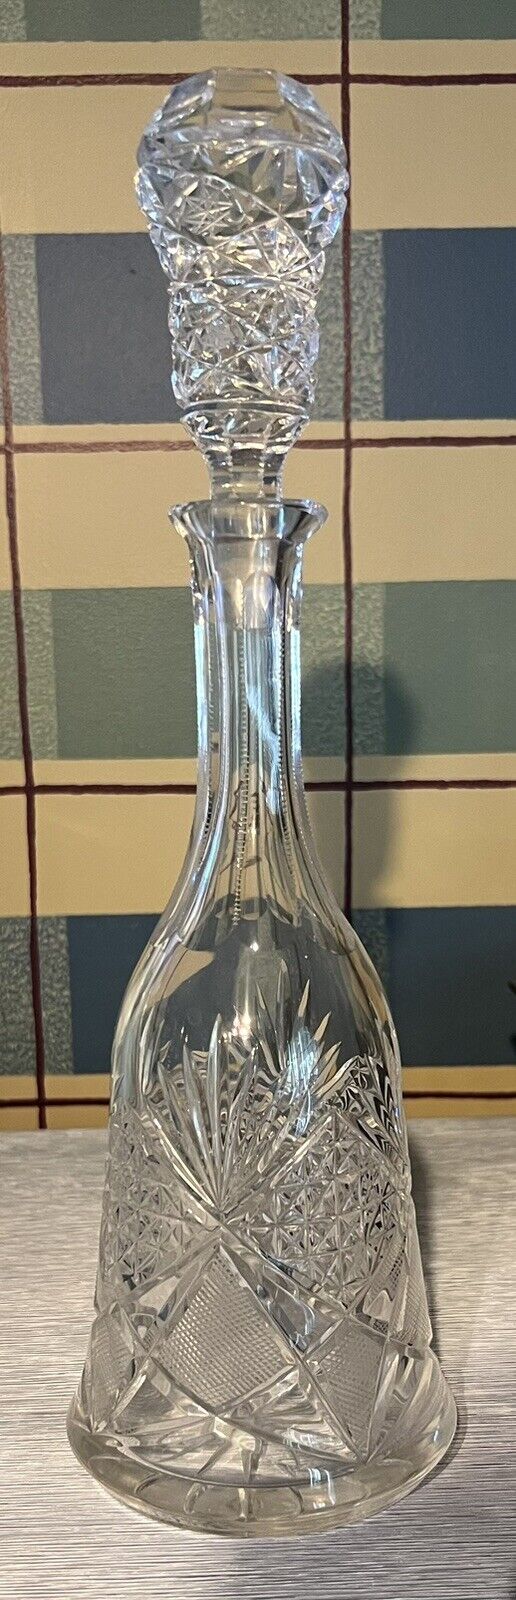 Vintage Heavy Cut Crystal Glass Decanter with Stopper